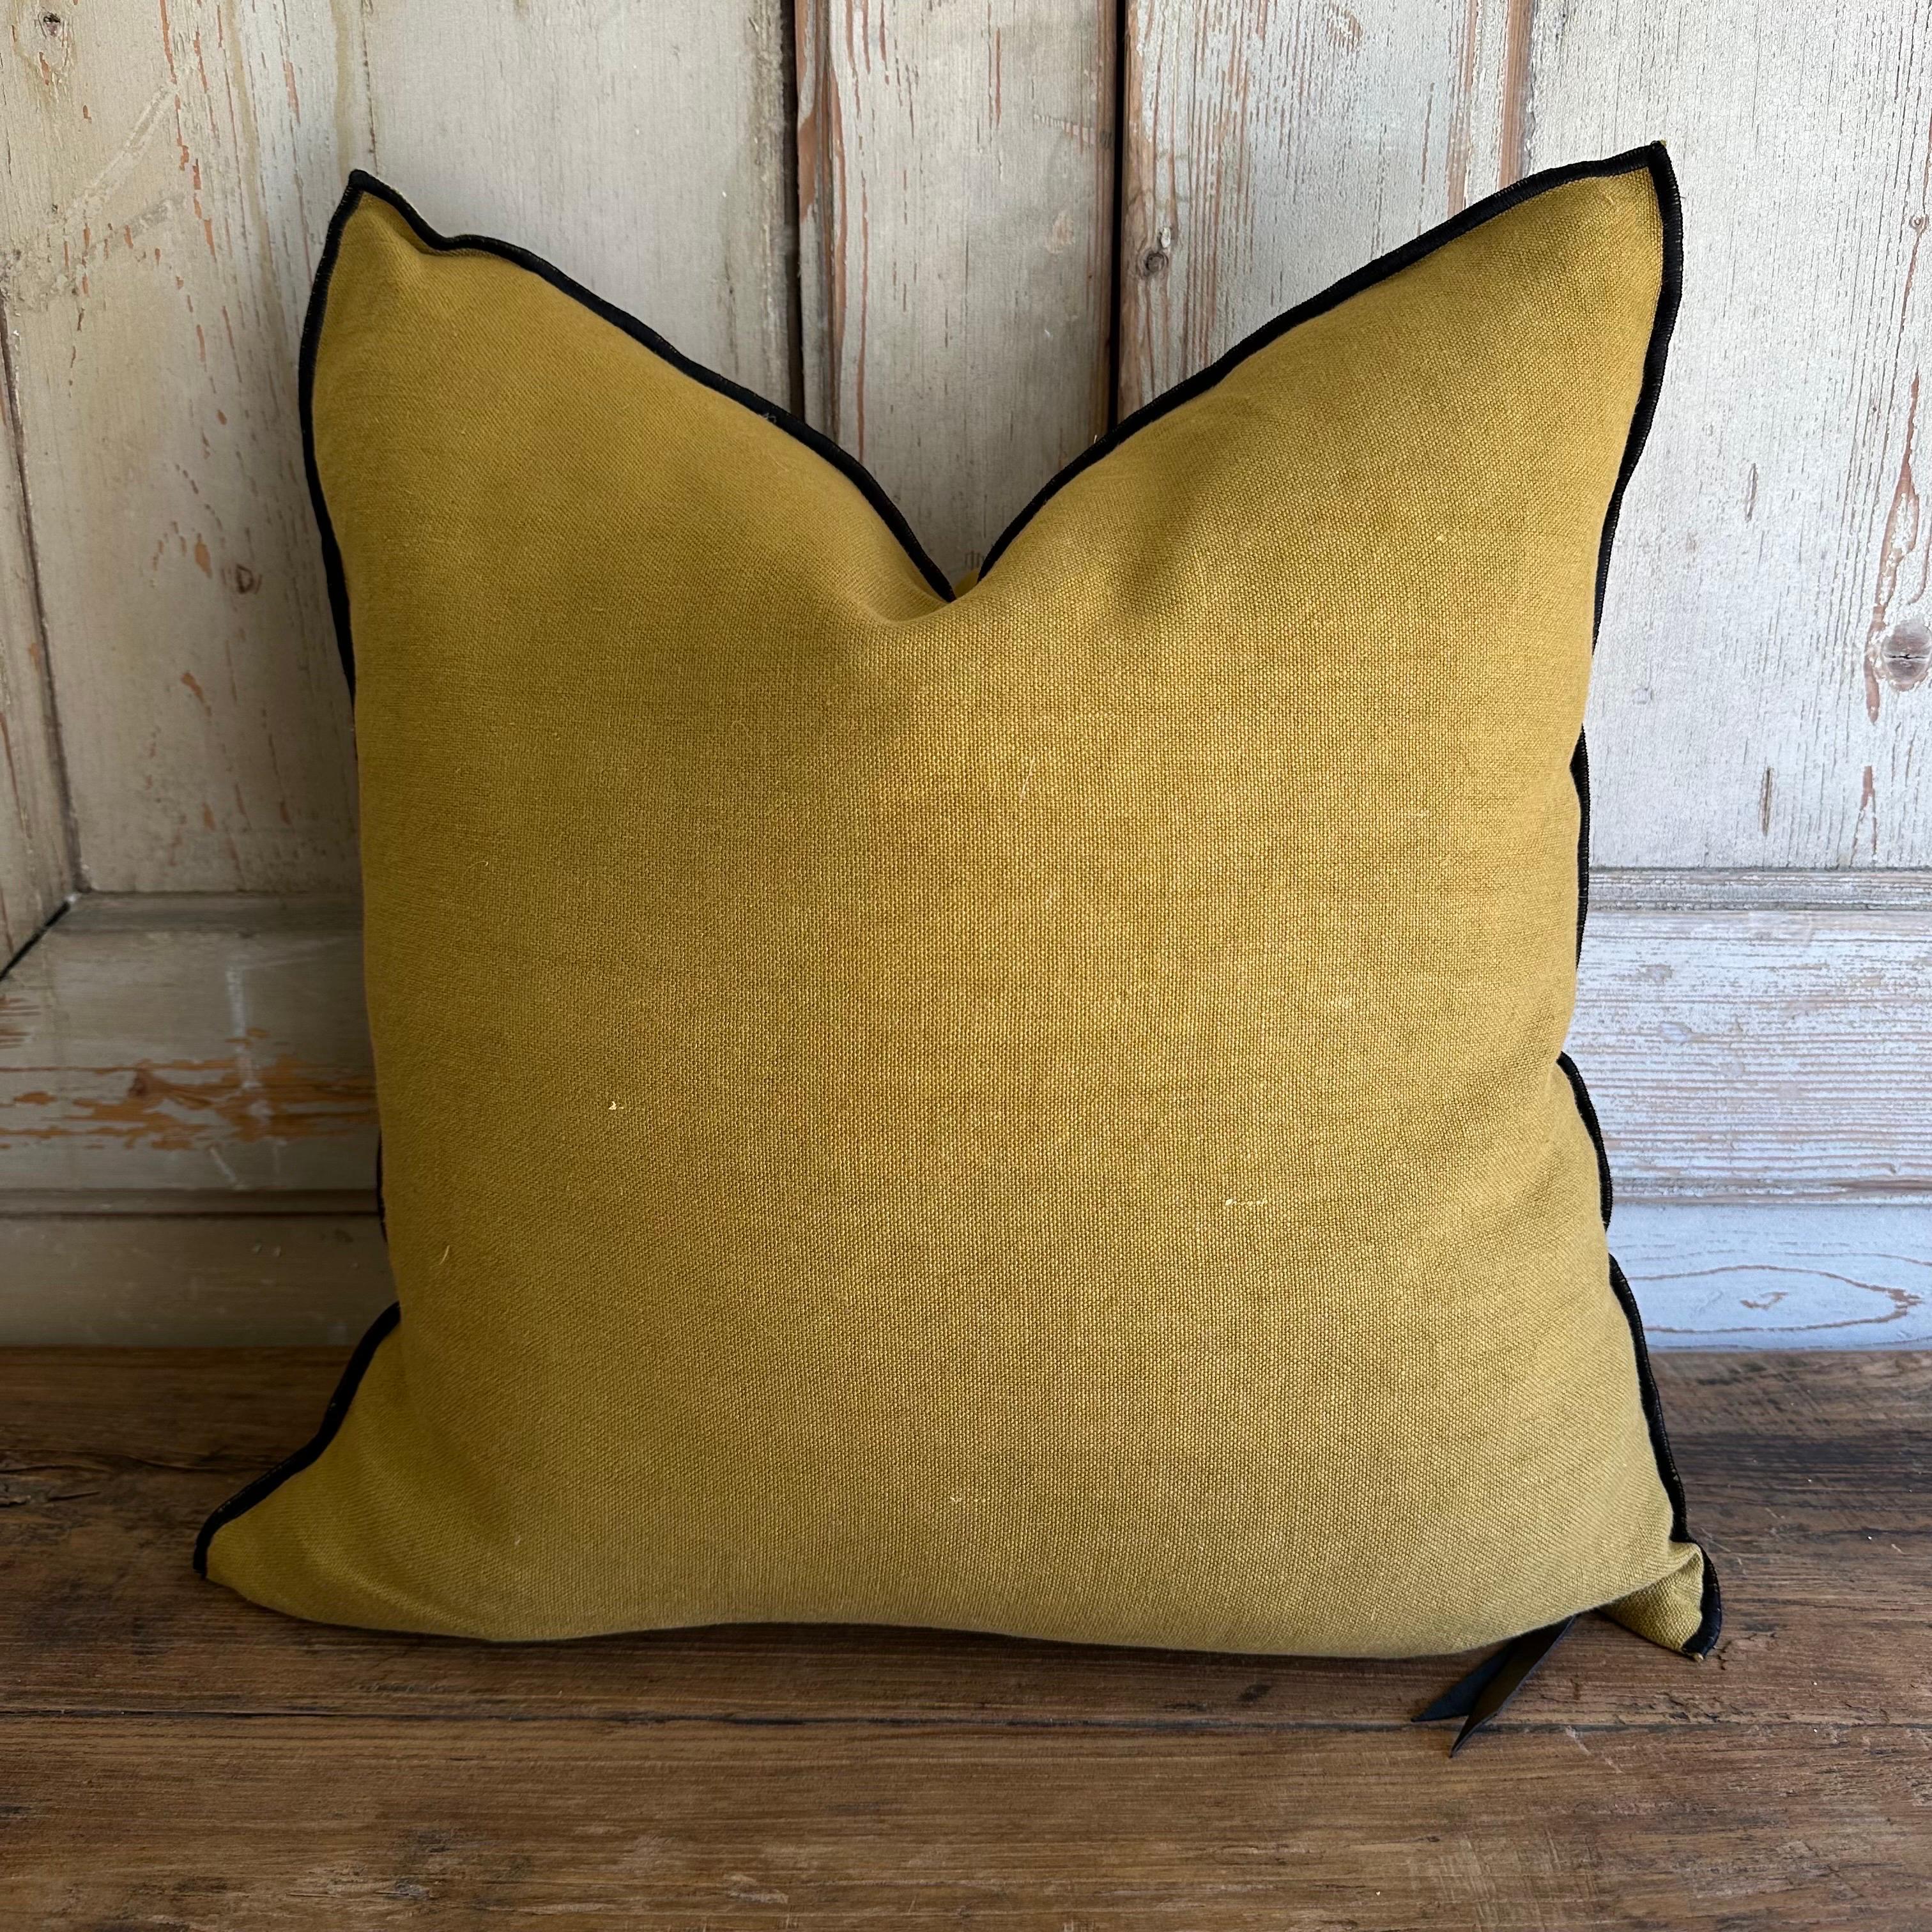 Color: Ocre; a deeper mustard yellow with brown tones, linen textured style pillow with a stitched edge, metal zipper closure. 
Size: 22